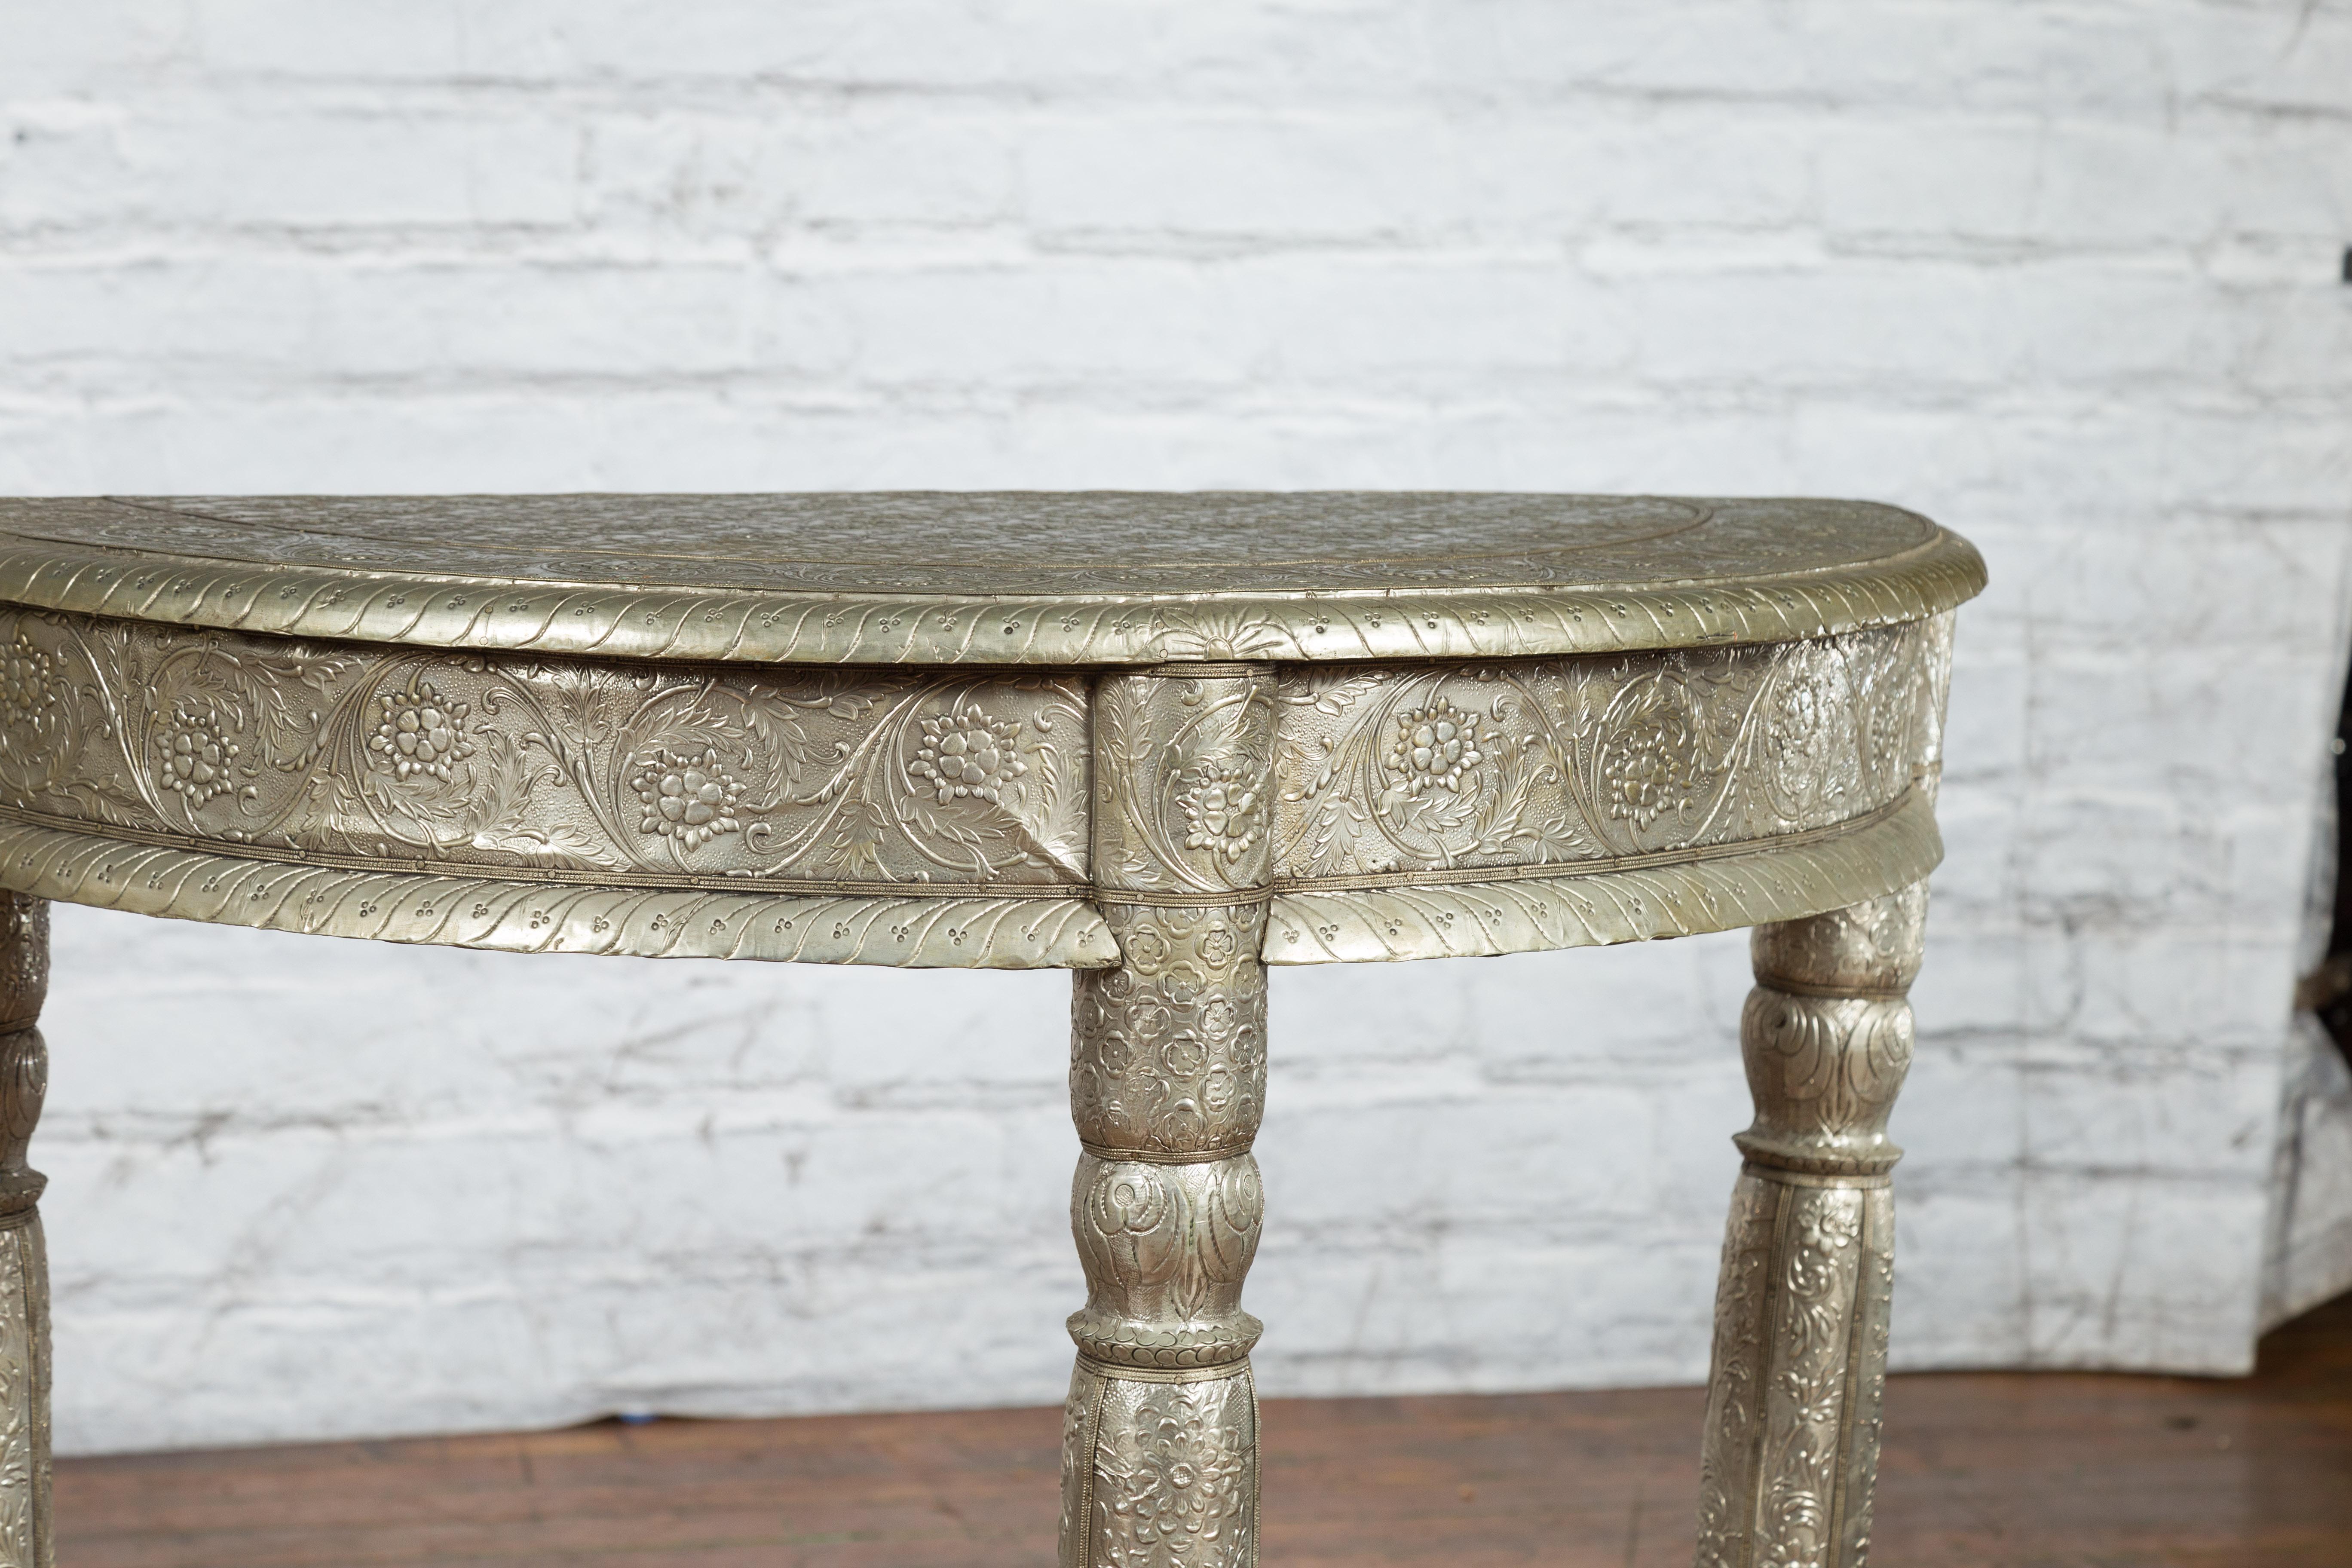 Pair of Indian Metal Sheathing Repoussé Demilune Tables with Floral Arabesques For Sale 2